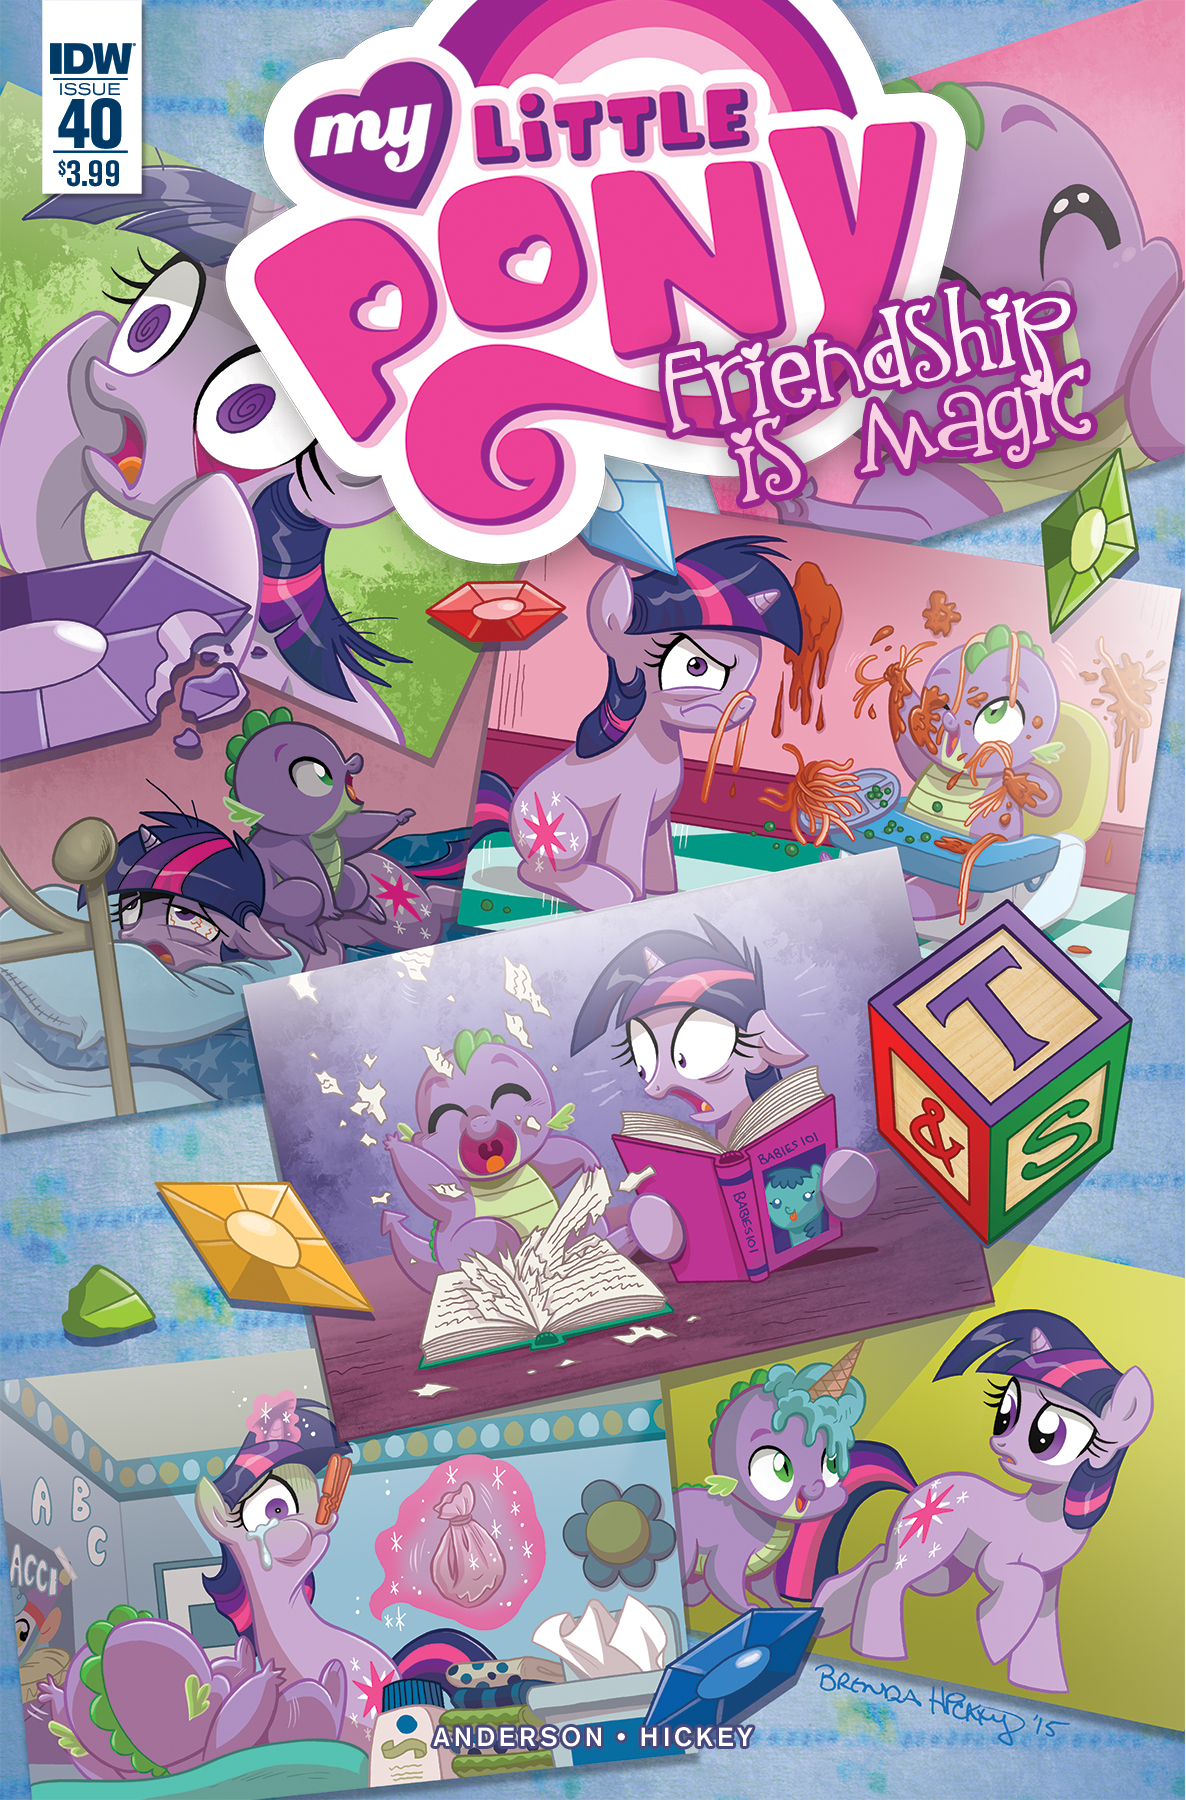 My Little Pony: Friendship is Magic #40 Cover